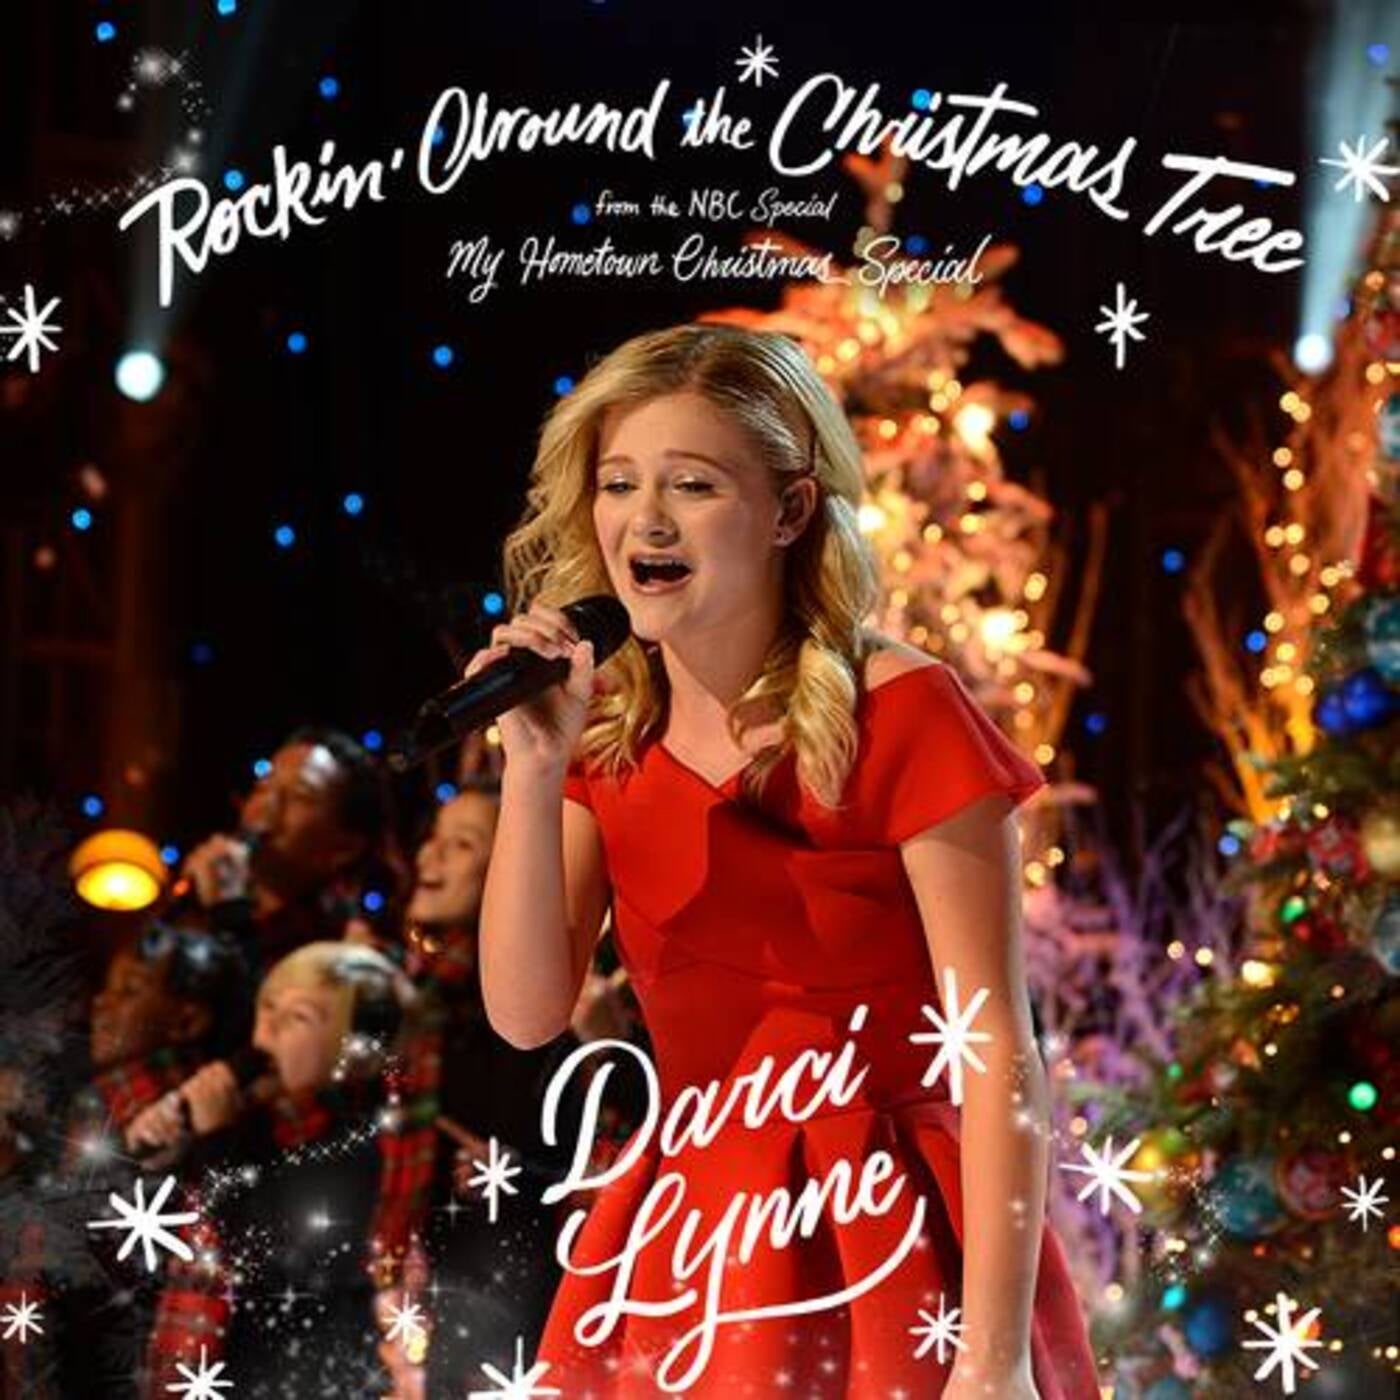 Rockin' Around the Christmas Tree (from the NBC Special "My Hometown